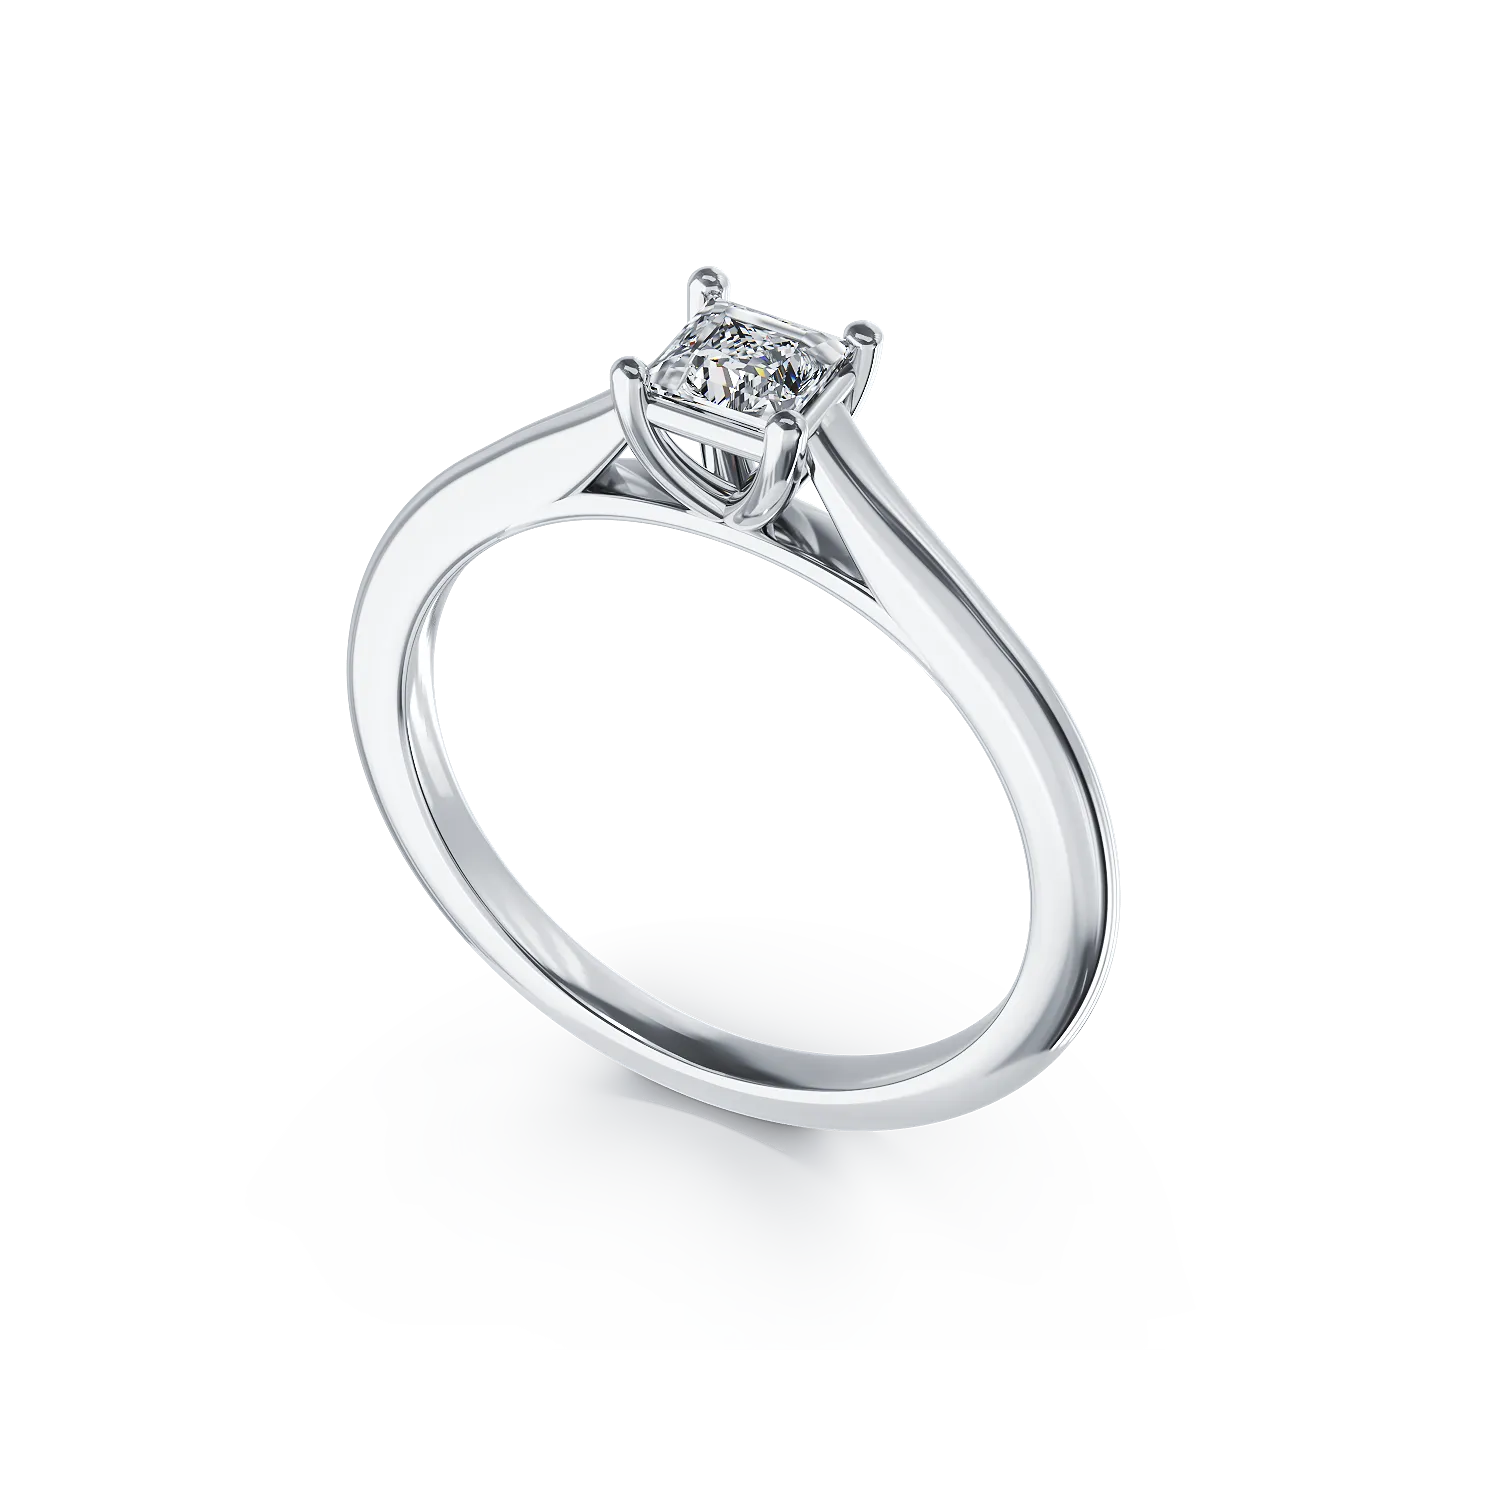 Platinum engagement ring with a 0.33ct solitaire diamond